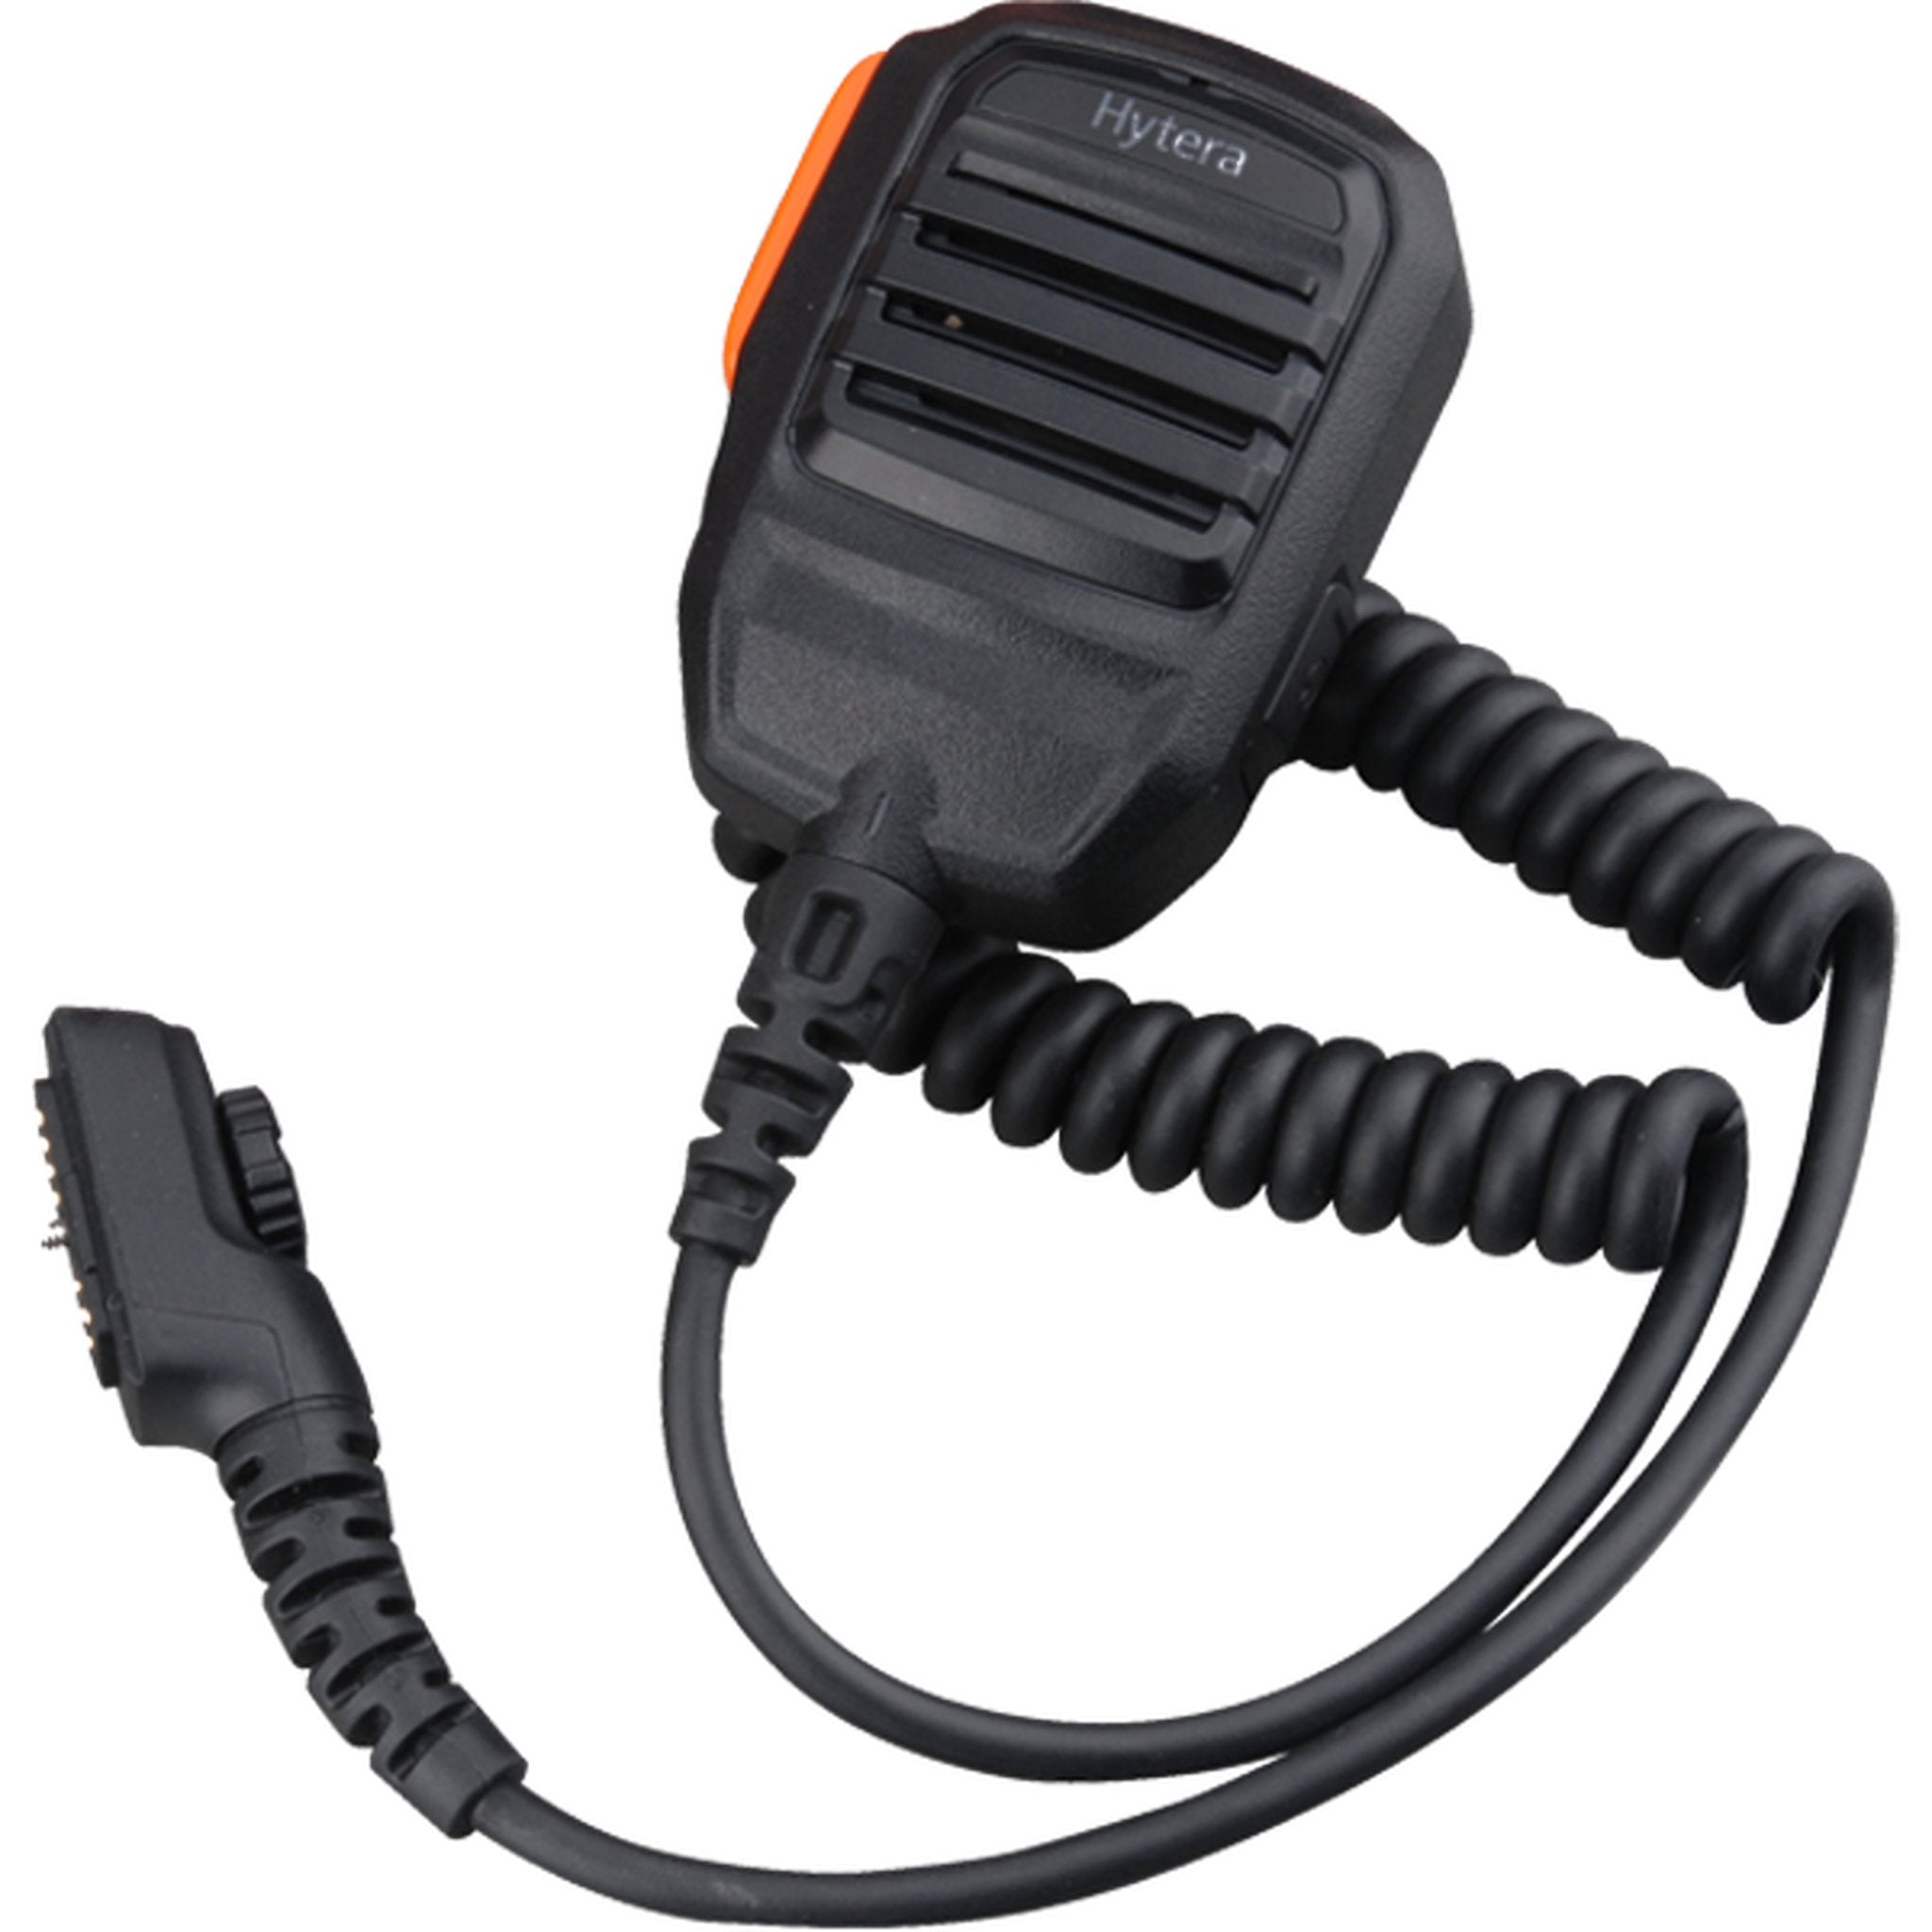 Hytera SM18N2 Speaker Microphone for Portable Two-Way Radios